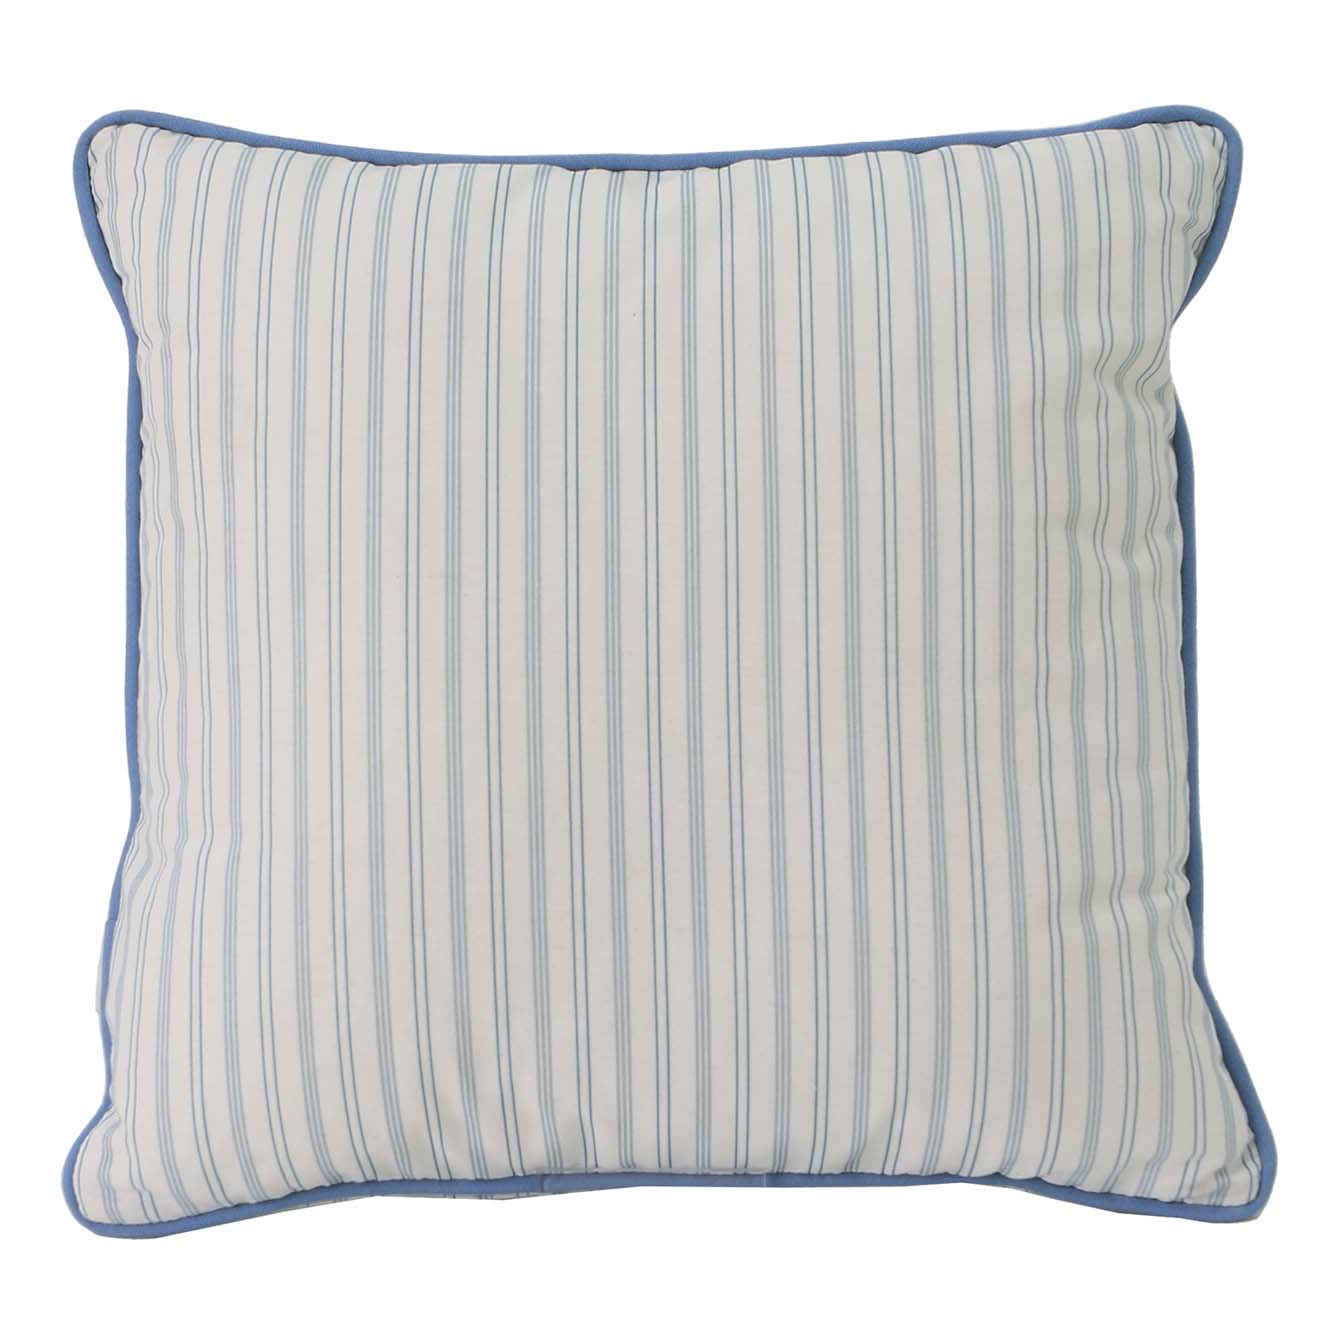 Lille Stripe Dove Grey Outdoor Scatter Cushion by Laura Ashley